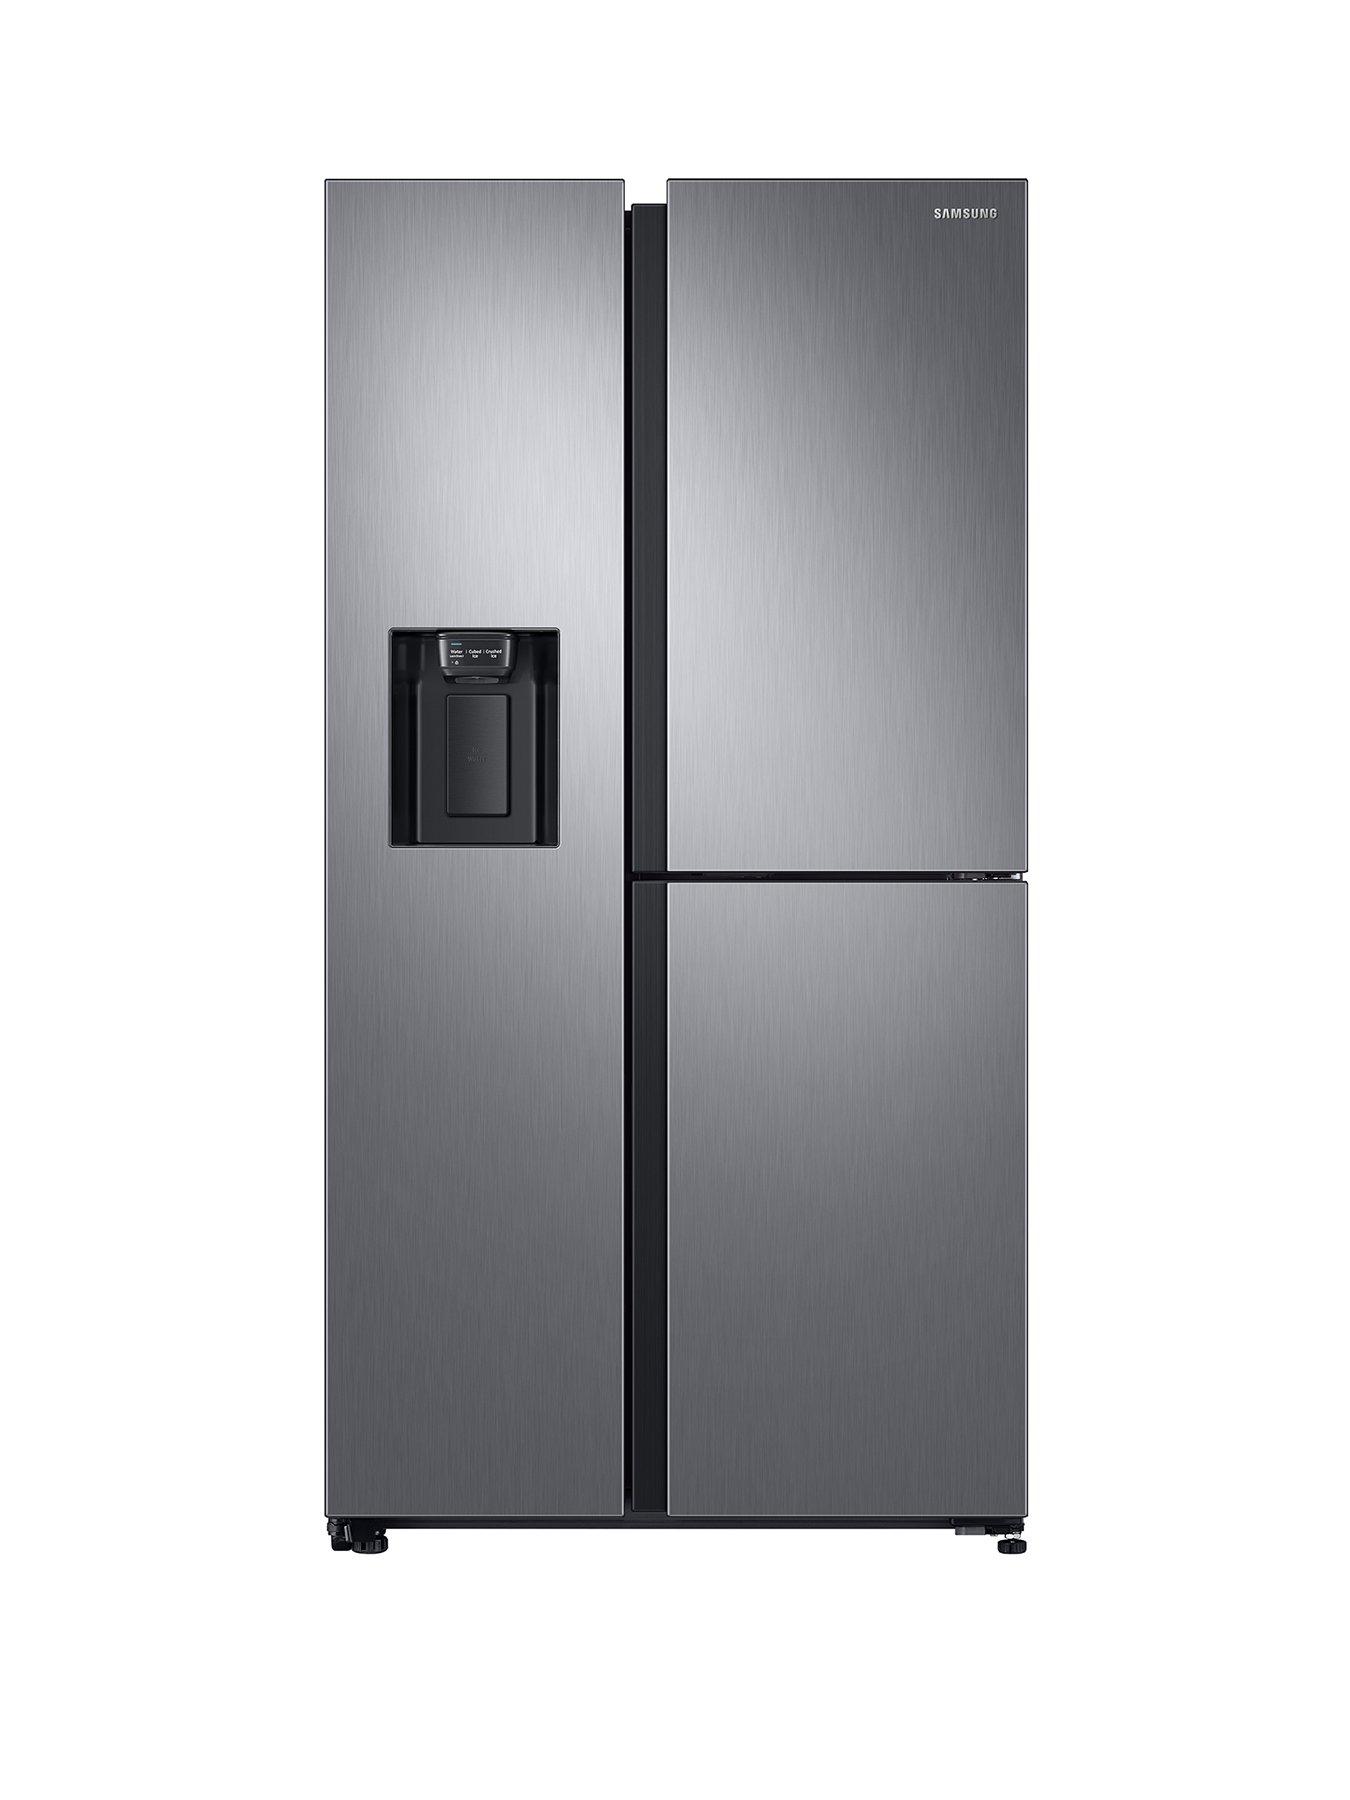 Samsung Rs68N8670S9/Eu French Door Frost Free Fridge Freezer With Plumbed Ice, Water Dispenser And 5 Year Samsung Parts And Labour Warranty – Matt Silver